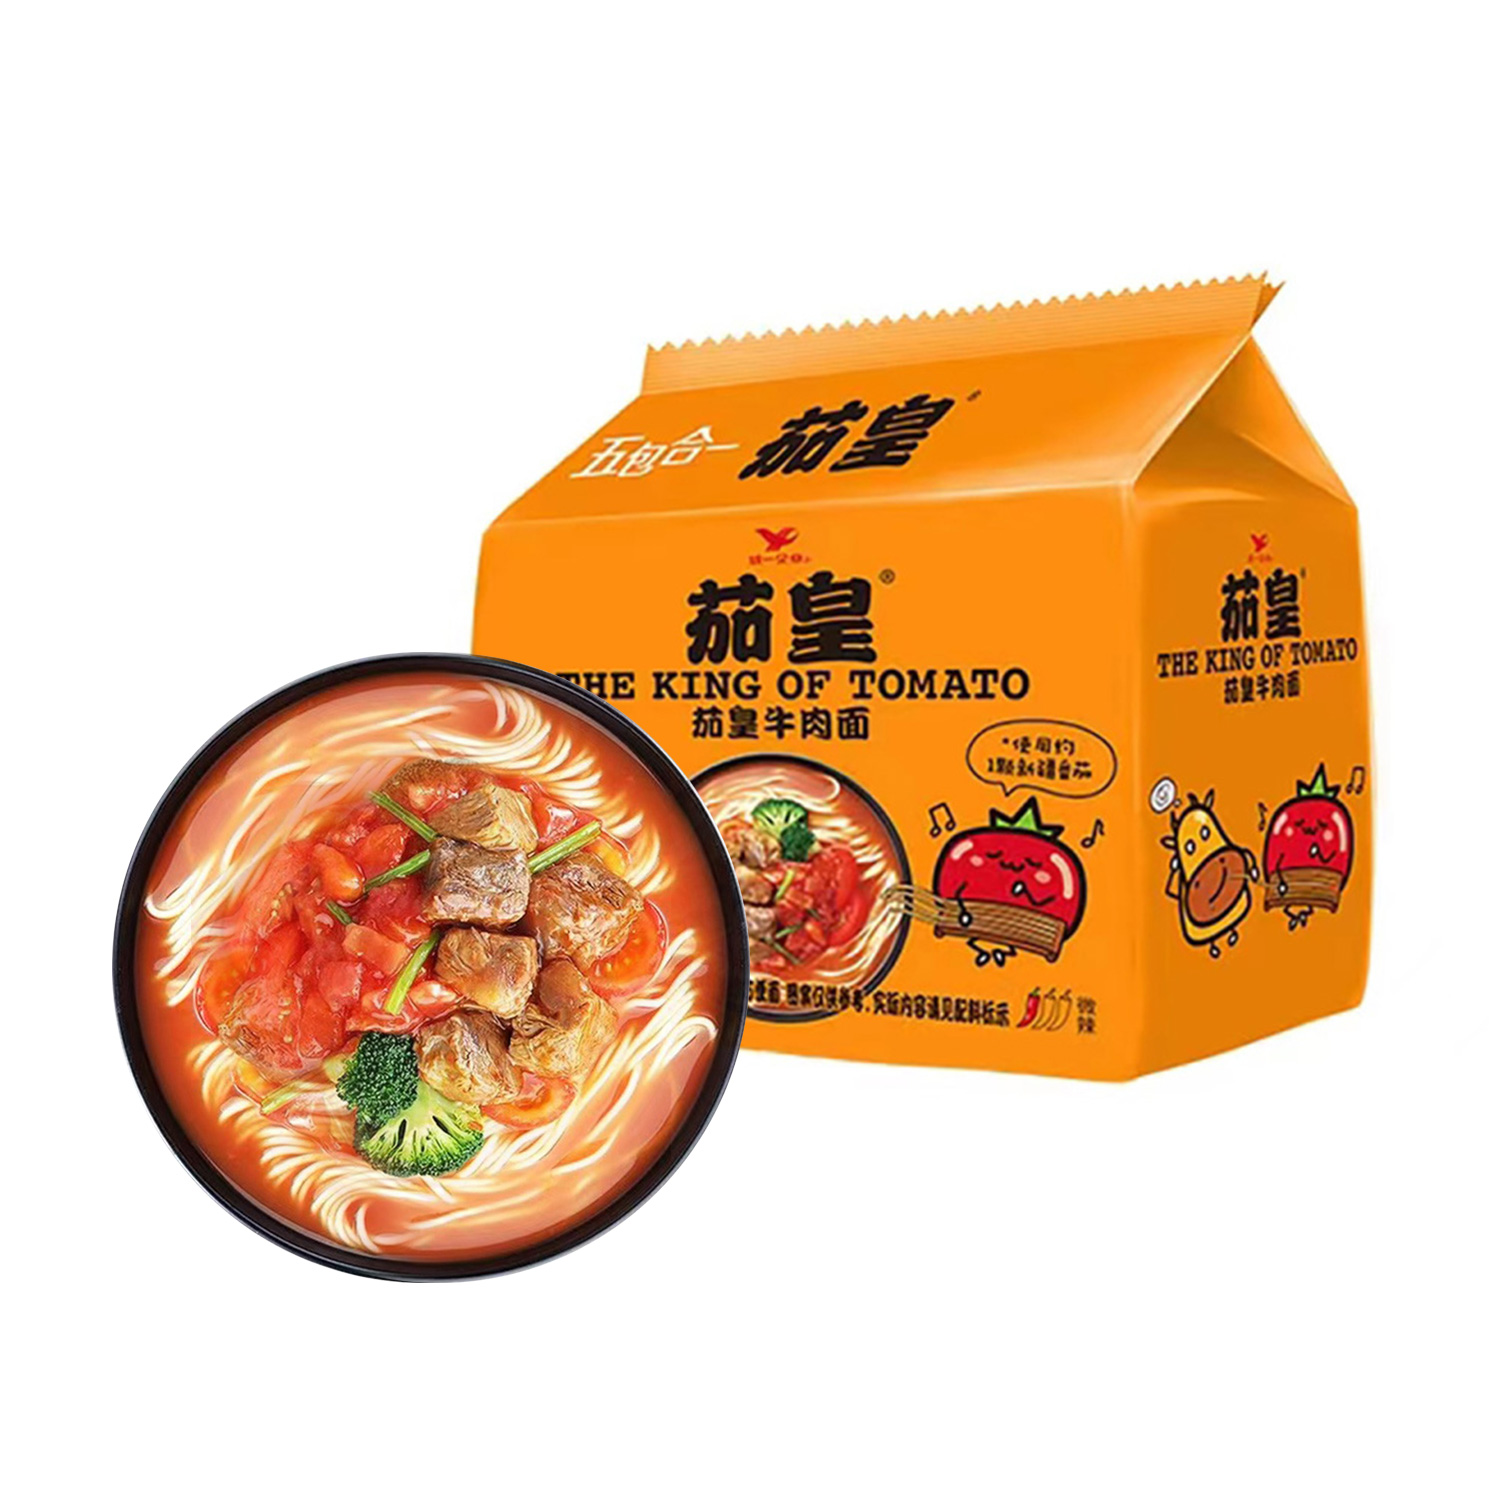 Uni-President The King of Tomato Beef Noodles 126g*5-eBest-Instant Noodles,Instant food